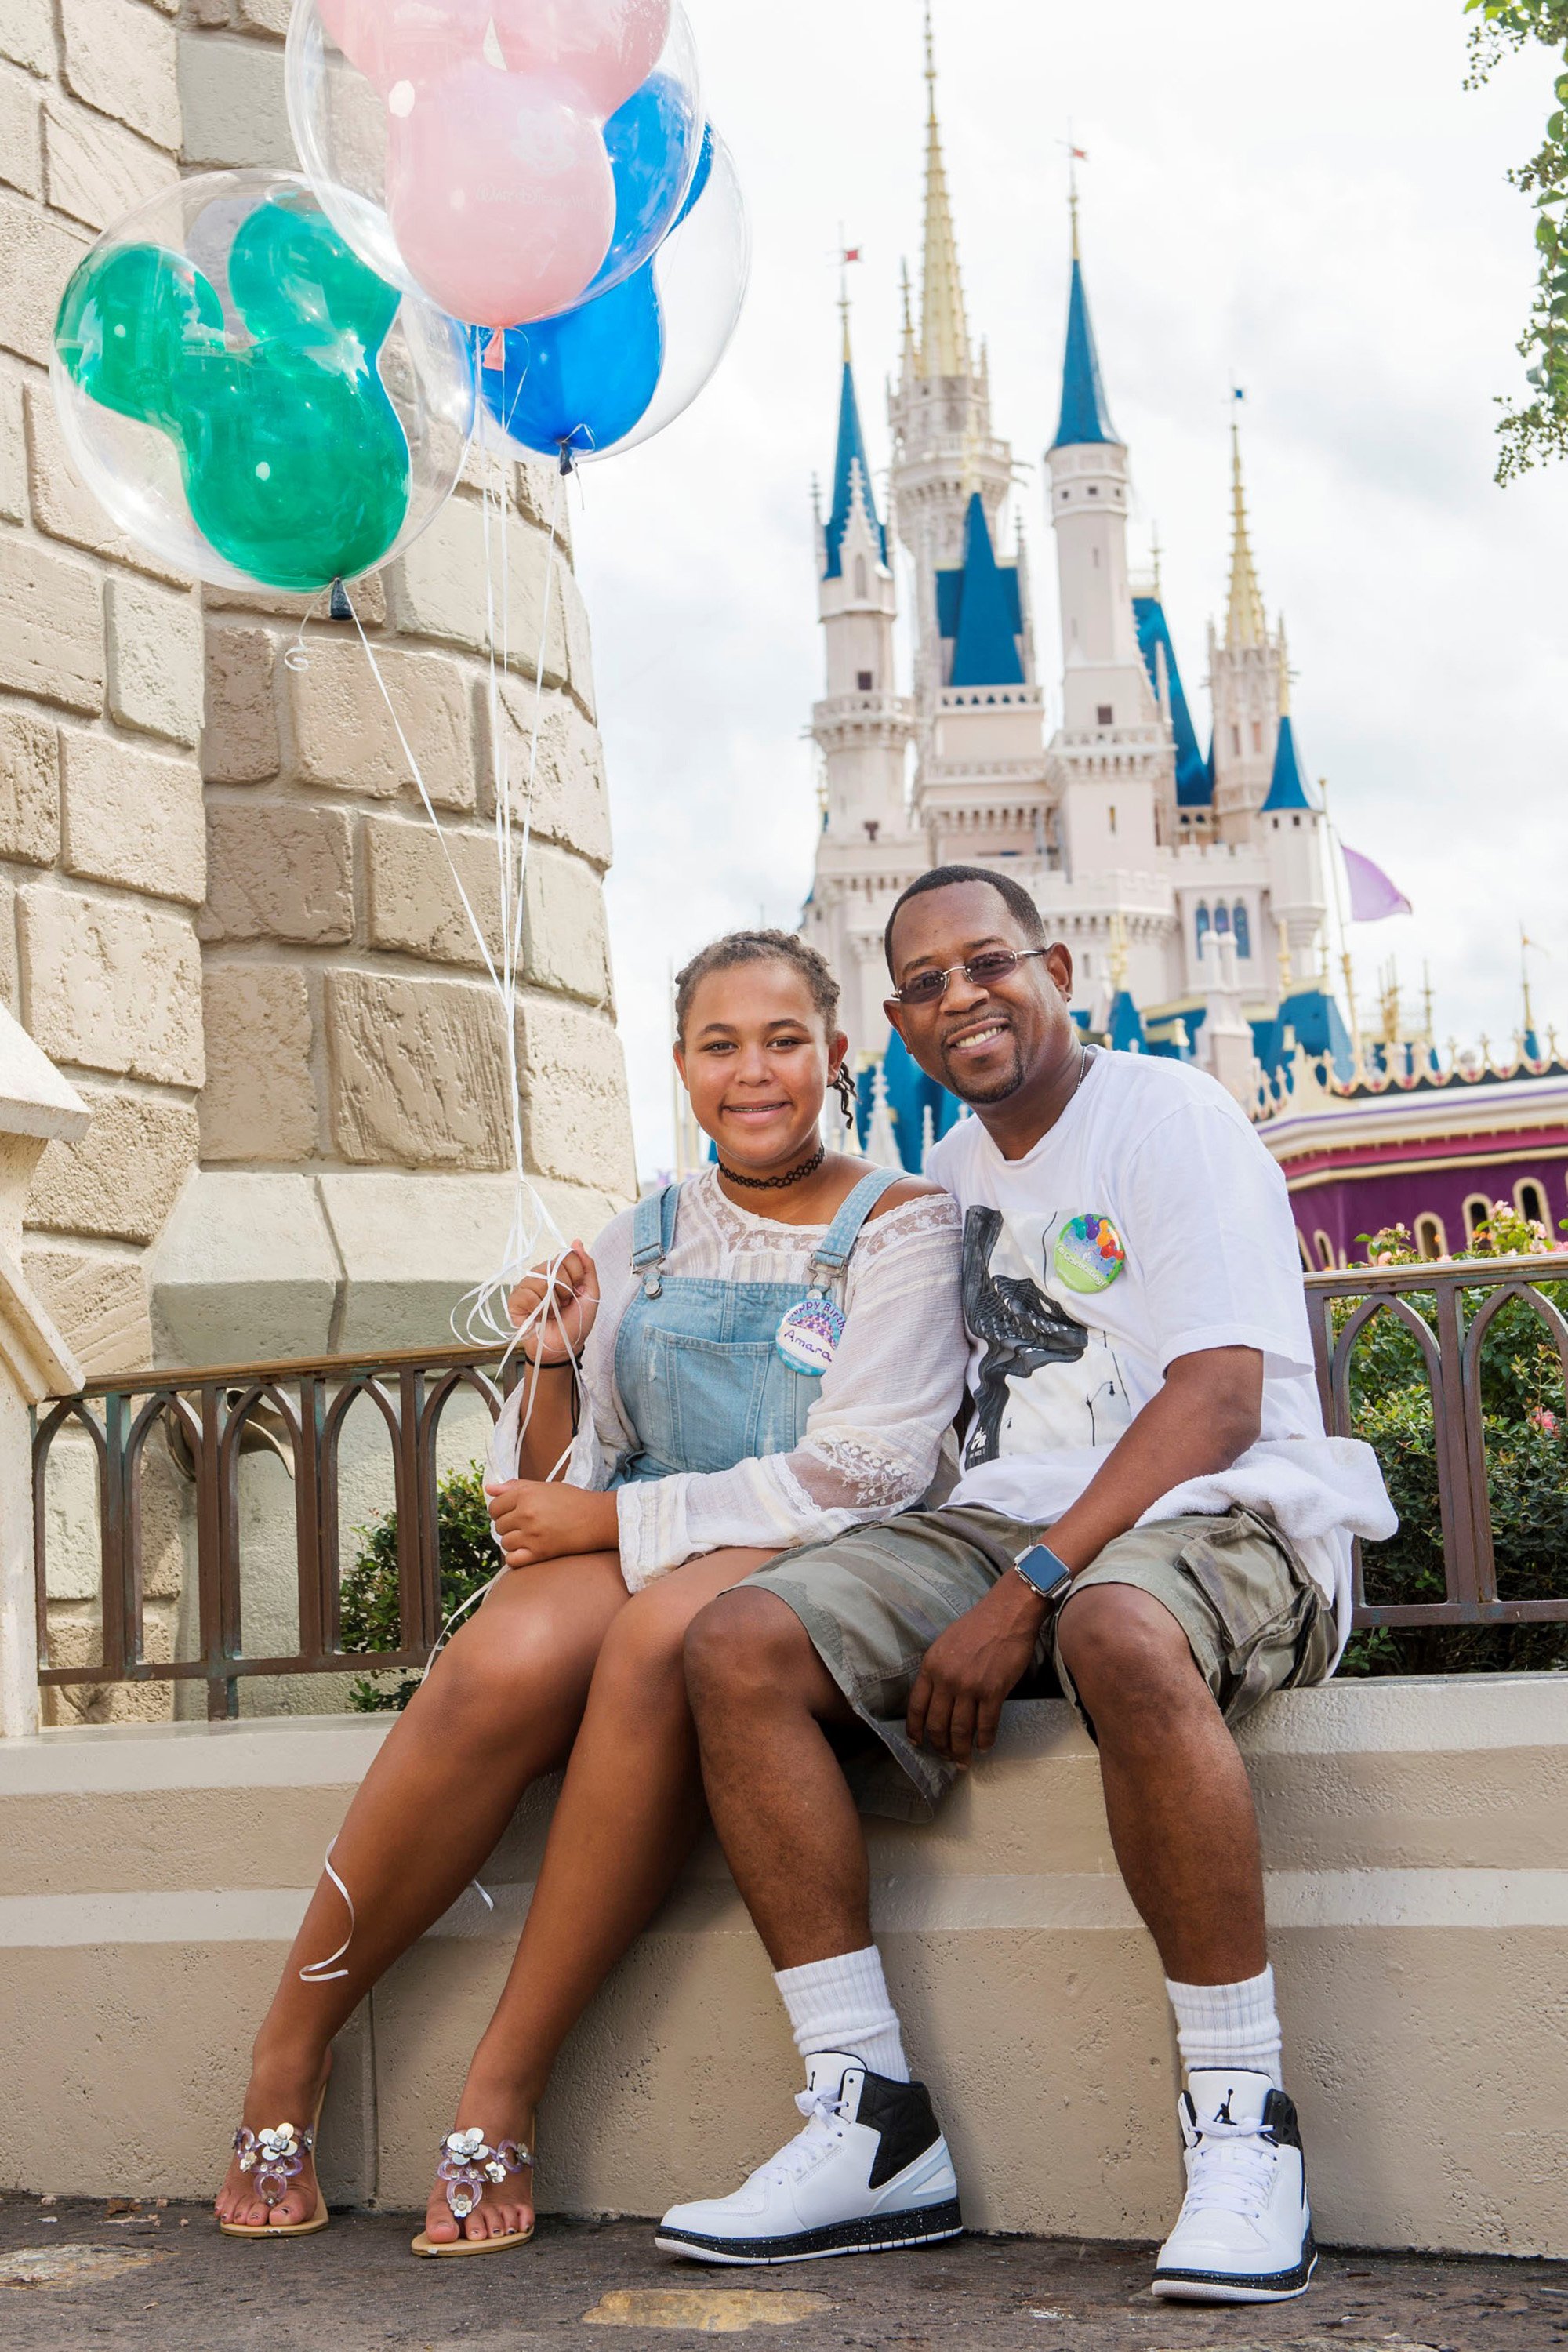 Actor Martin Lawrence, and his daughter, Amara Lawrence, are seen celebrating Amara's 13th birthday at Magic Kingdom park, Florida, on September 14, 2015. | Source: Getty Images